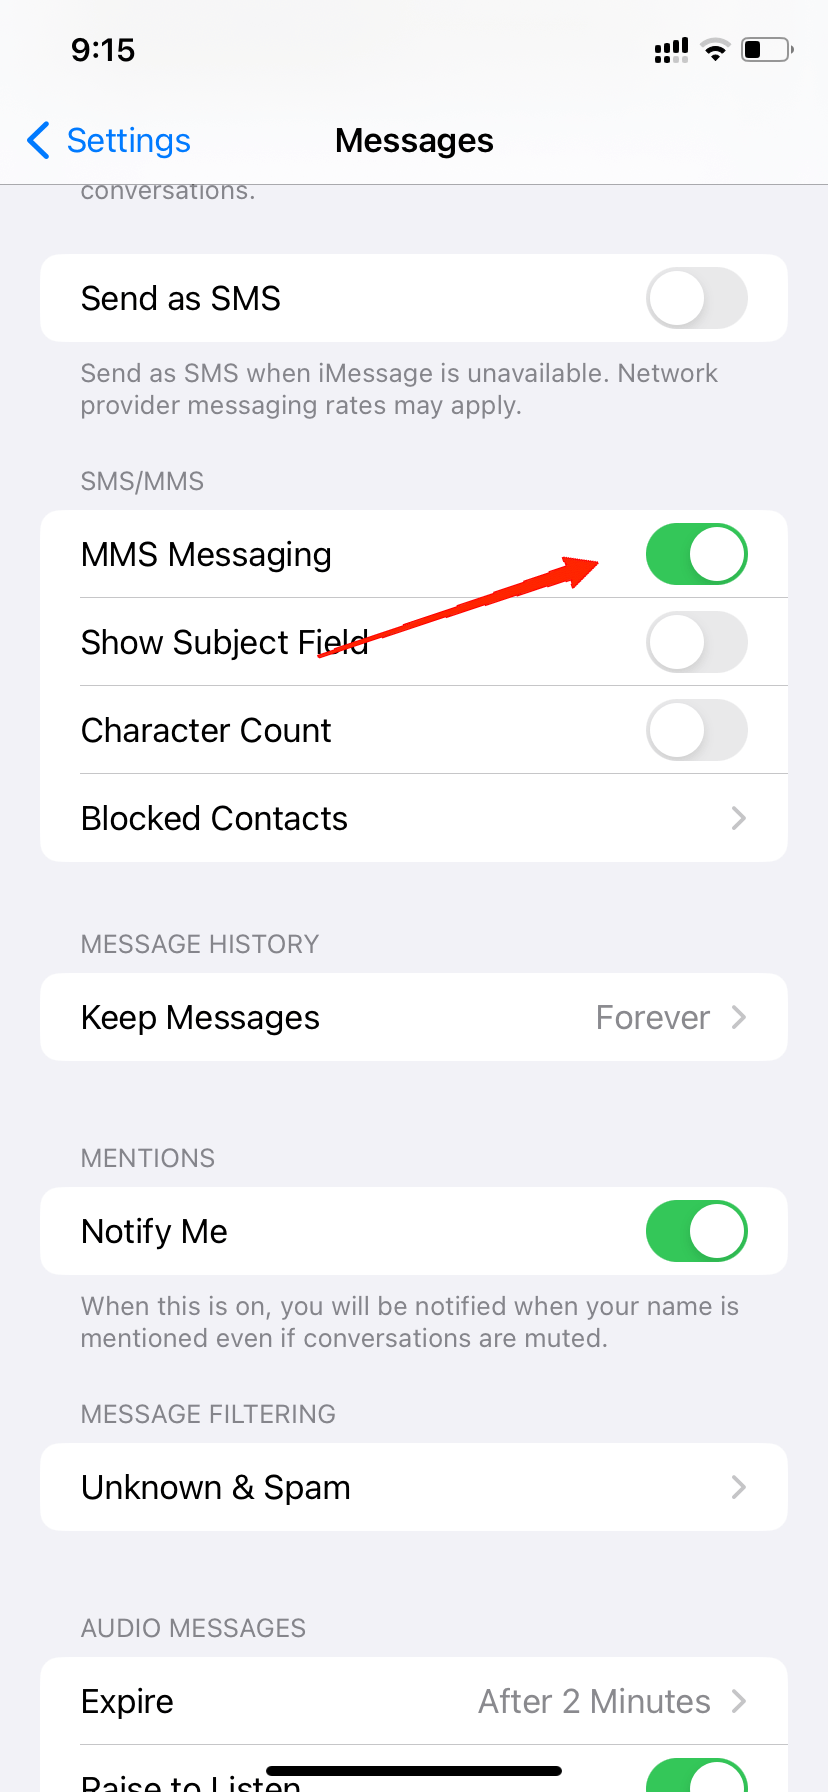 Finally, tap on the toggle beside MMS Messaging to enable the feature.